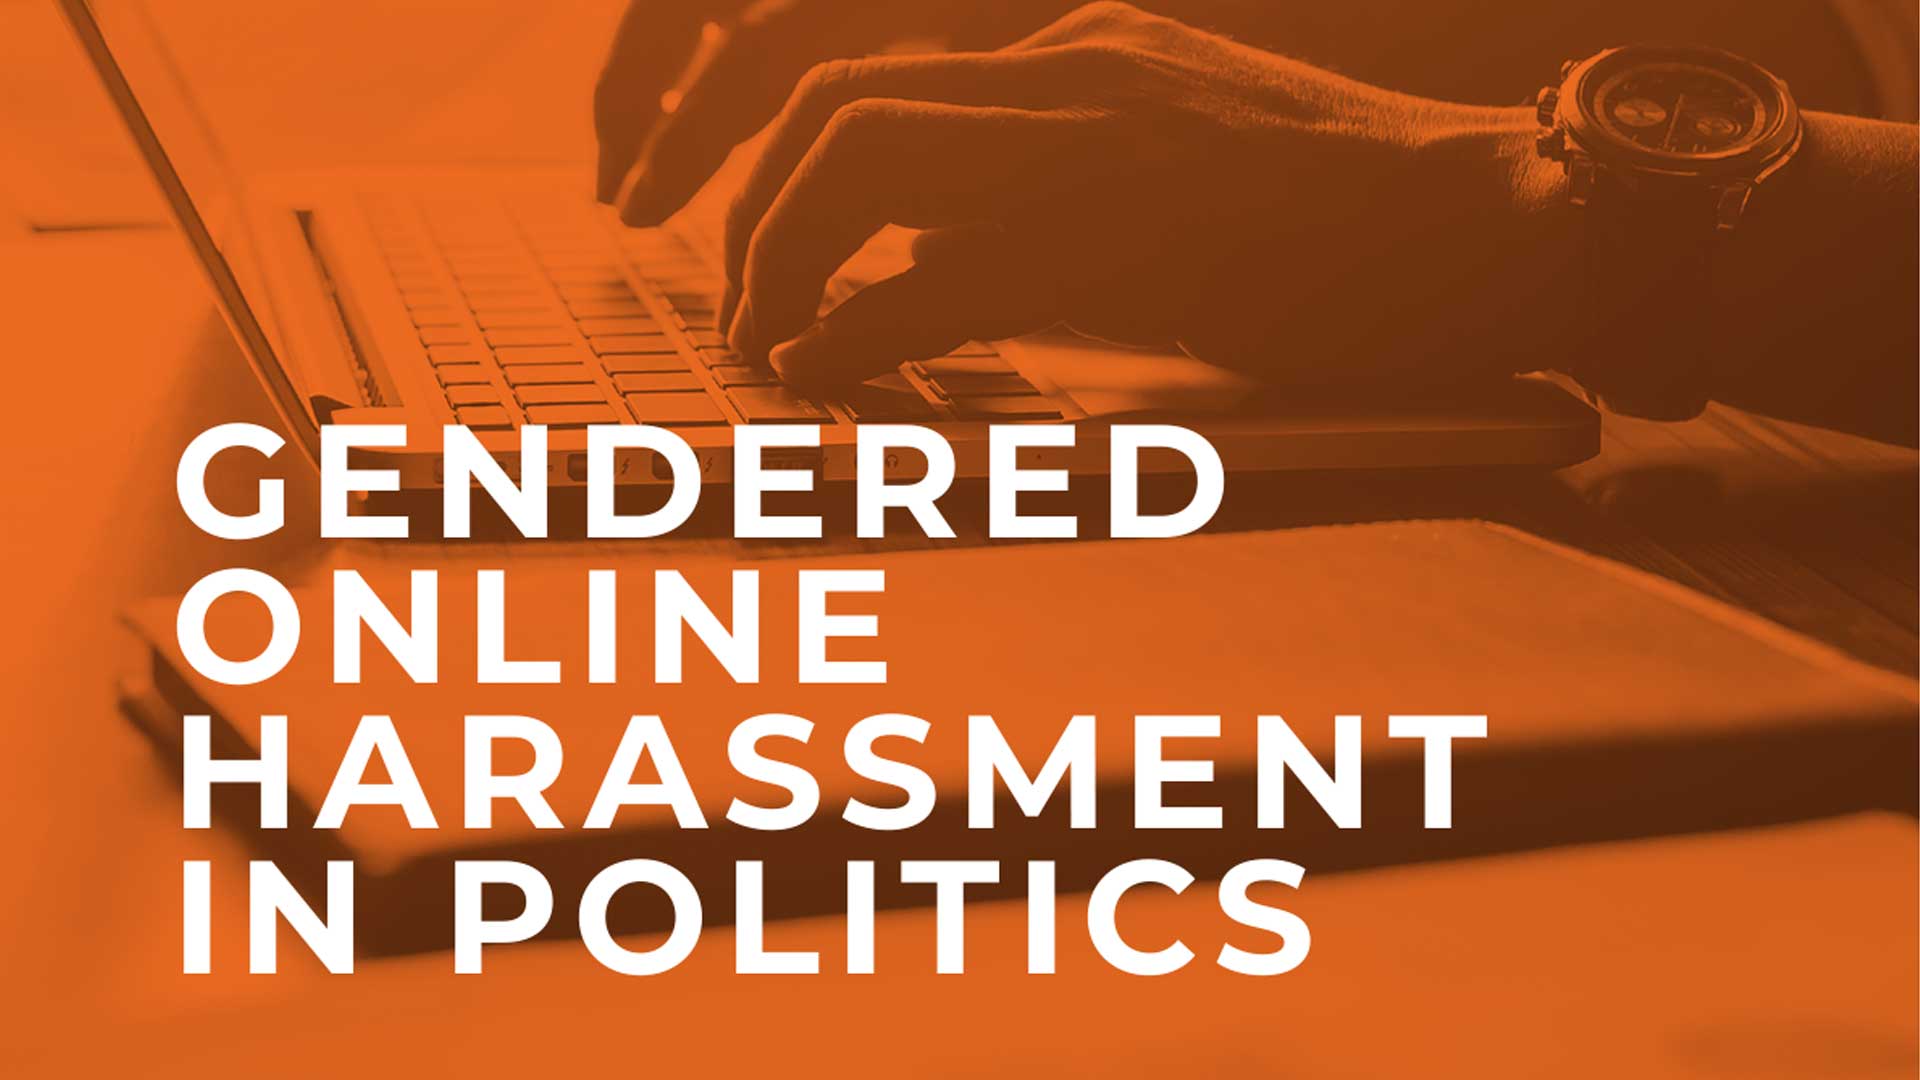 Hands typing on a keyboard overlaid with orange block colour and the words "GENDERED ONLINE HARASSMENT IN POLITICS"